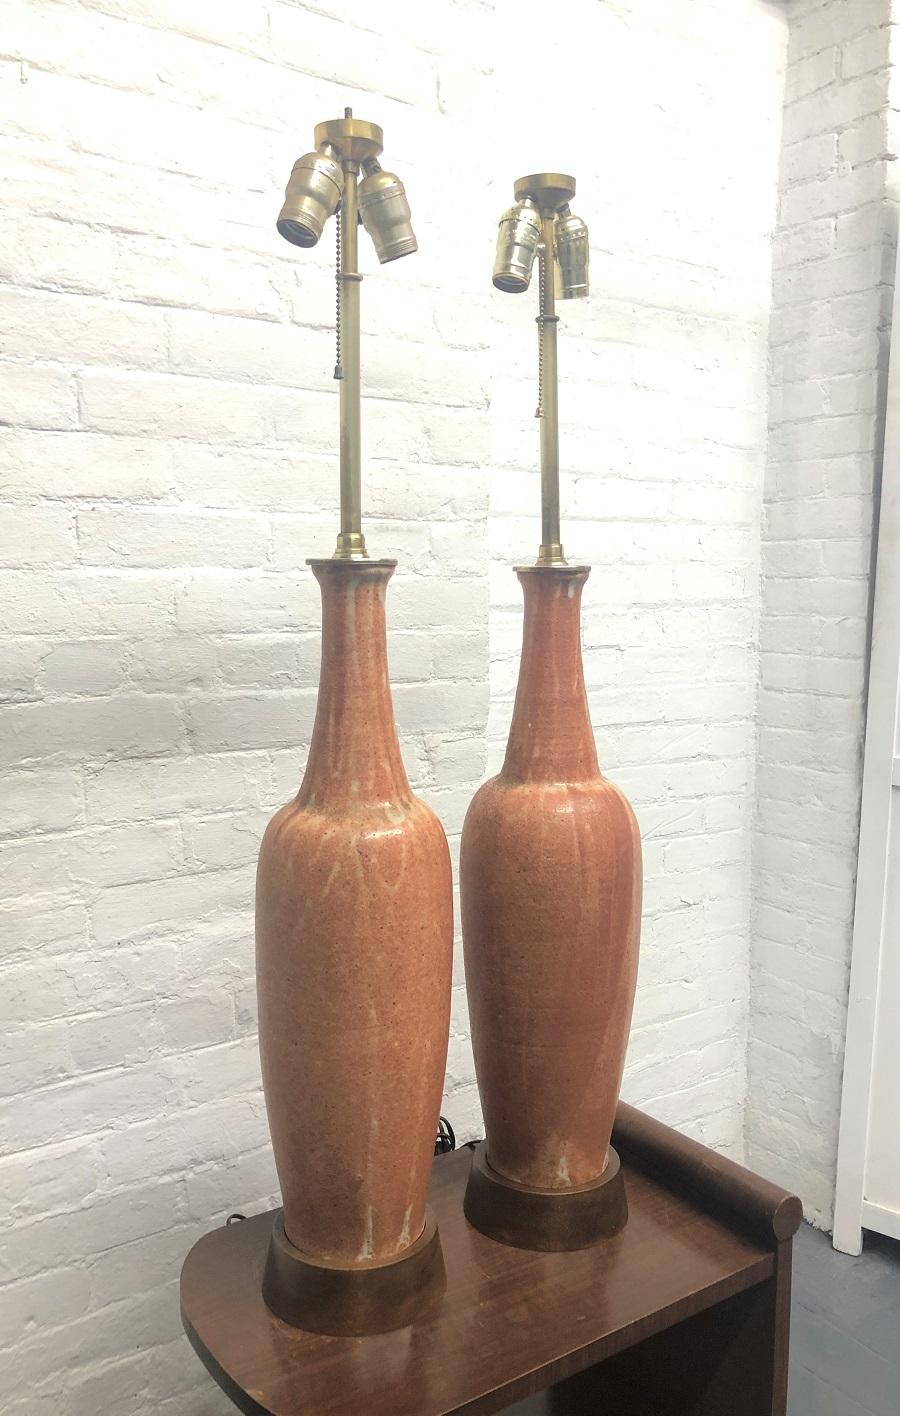 Pair of ceramic Italian lamps by Marcello Fantoni for Raymor. The base of the lamps are walnut.

Measures: 39 height (to top of finial). 
Under socket: 23.25 height. 
Body: 5.25 diameter. 
Base: 5.75 diameter.